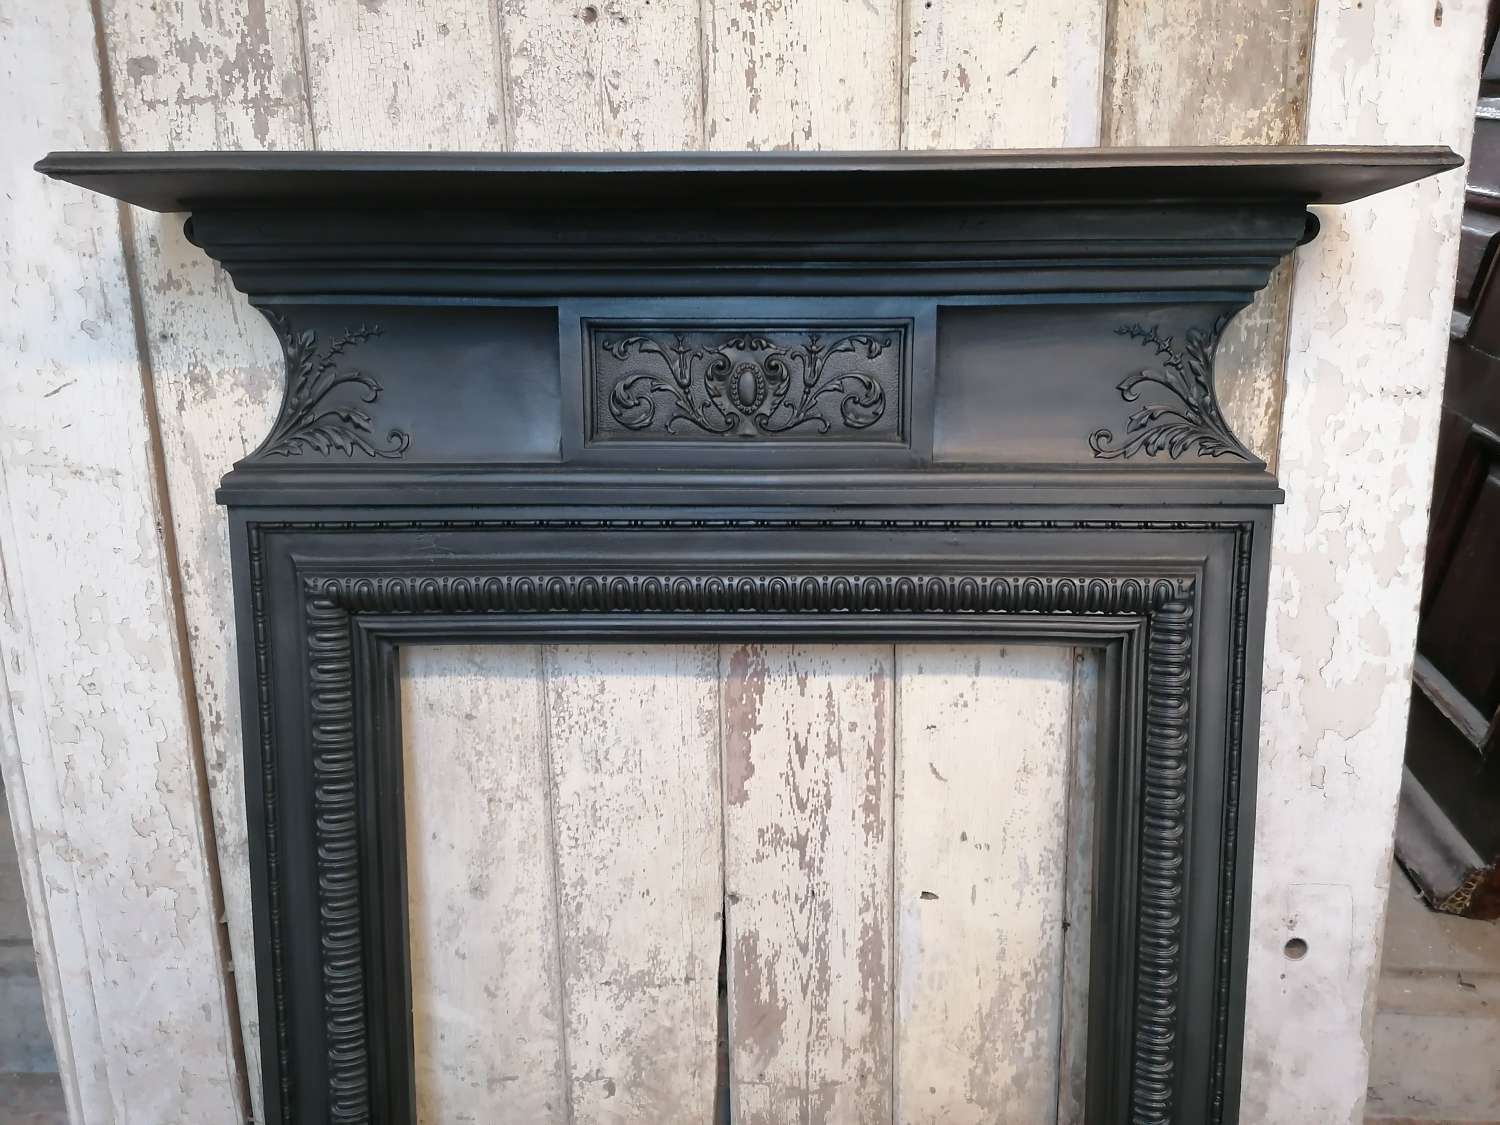 FS0186 A LARGE RECLAIMED DECORATIVE VICTORIAN CAST IRON FIRE SURROUND